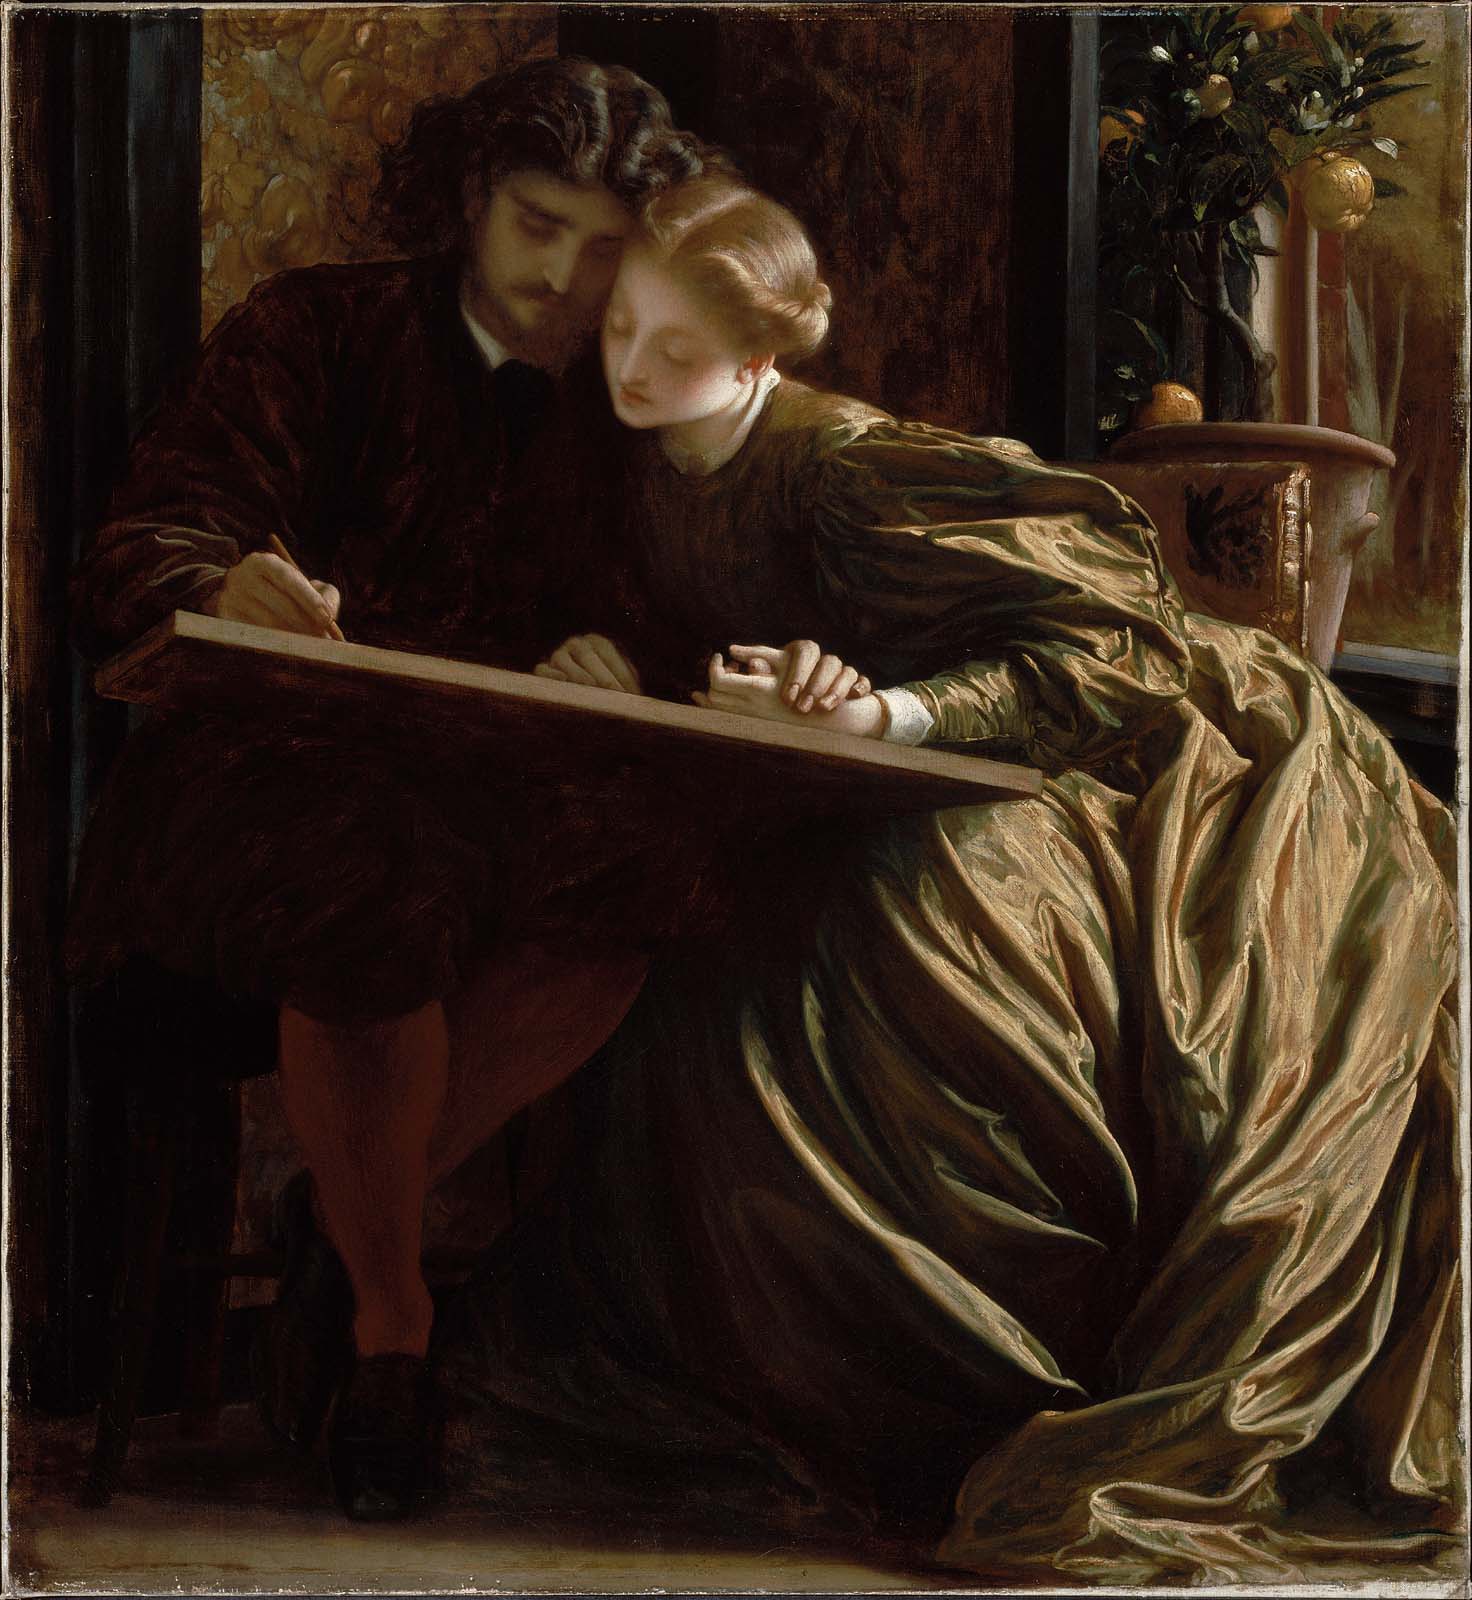 The Painter’s Honeymoon by Lord Frederick Leighton